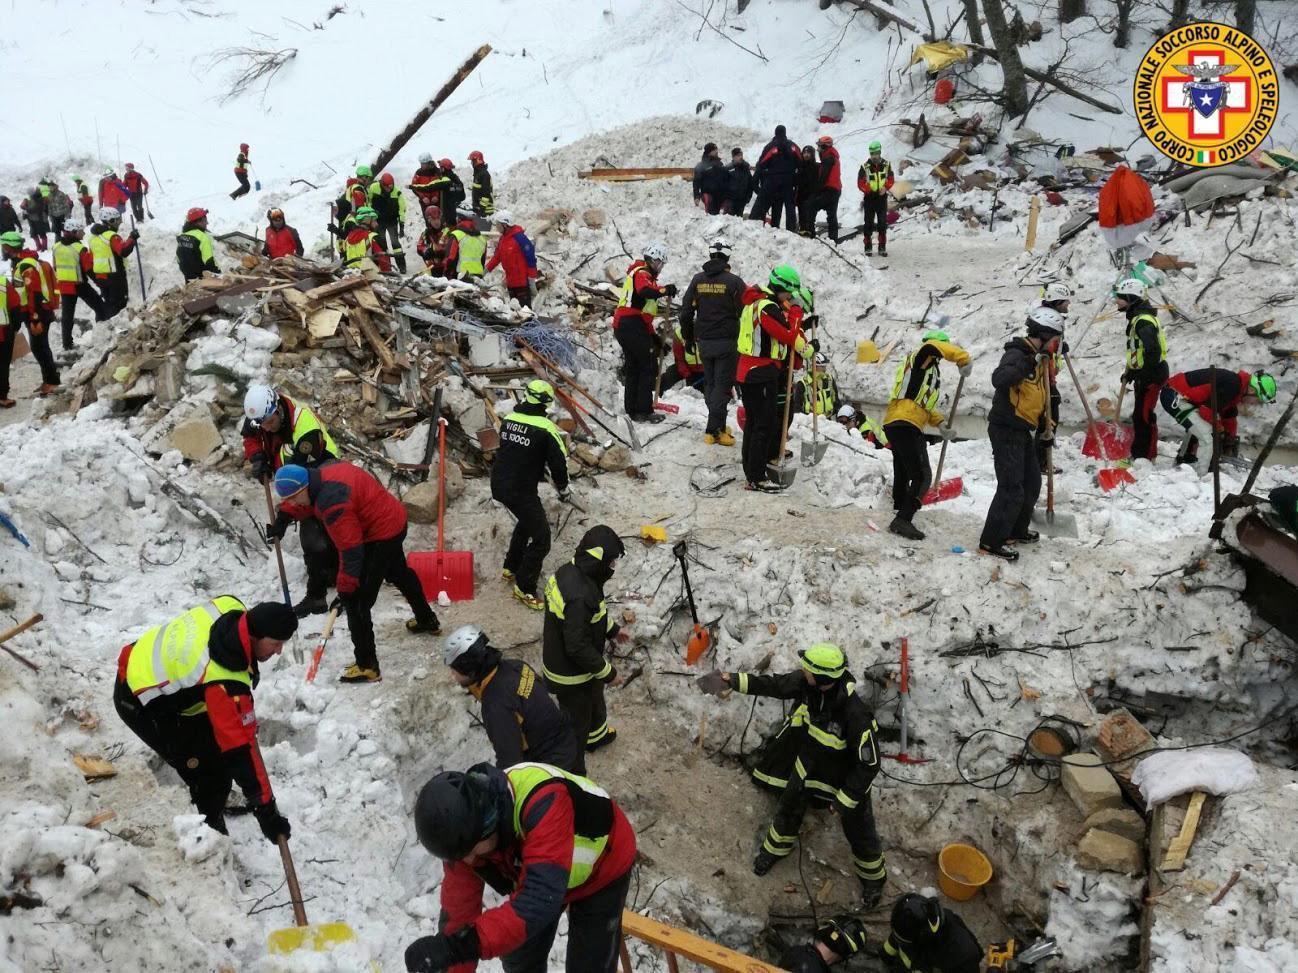 epa05745899 A handout photo made available by the Italian Mountain Rescue Service 'Corpo Nazionale Soccorso Alpino e Speleologico' (CNSAS) on 24 January 2017 shows rescue crews during search and rescue operations for missing guests at the Hotel Rigopiano in Farindola, Abruzzo region, Italy, 24 January 2017. Search operations for people still missing after an avalanche that hit the hotel on 18 January continued on 24 January amid extreme weather conditions, according to authorities. EPA/SOCCORSO ALPINO HANDOUT HANDOUT EDITORIAL USE ONLY/NO SALES/NO ARCHIVES